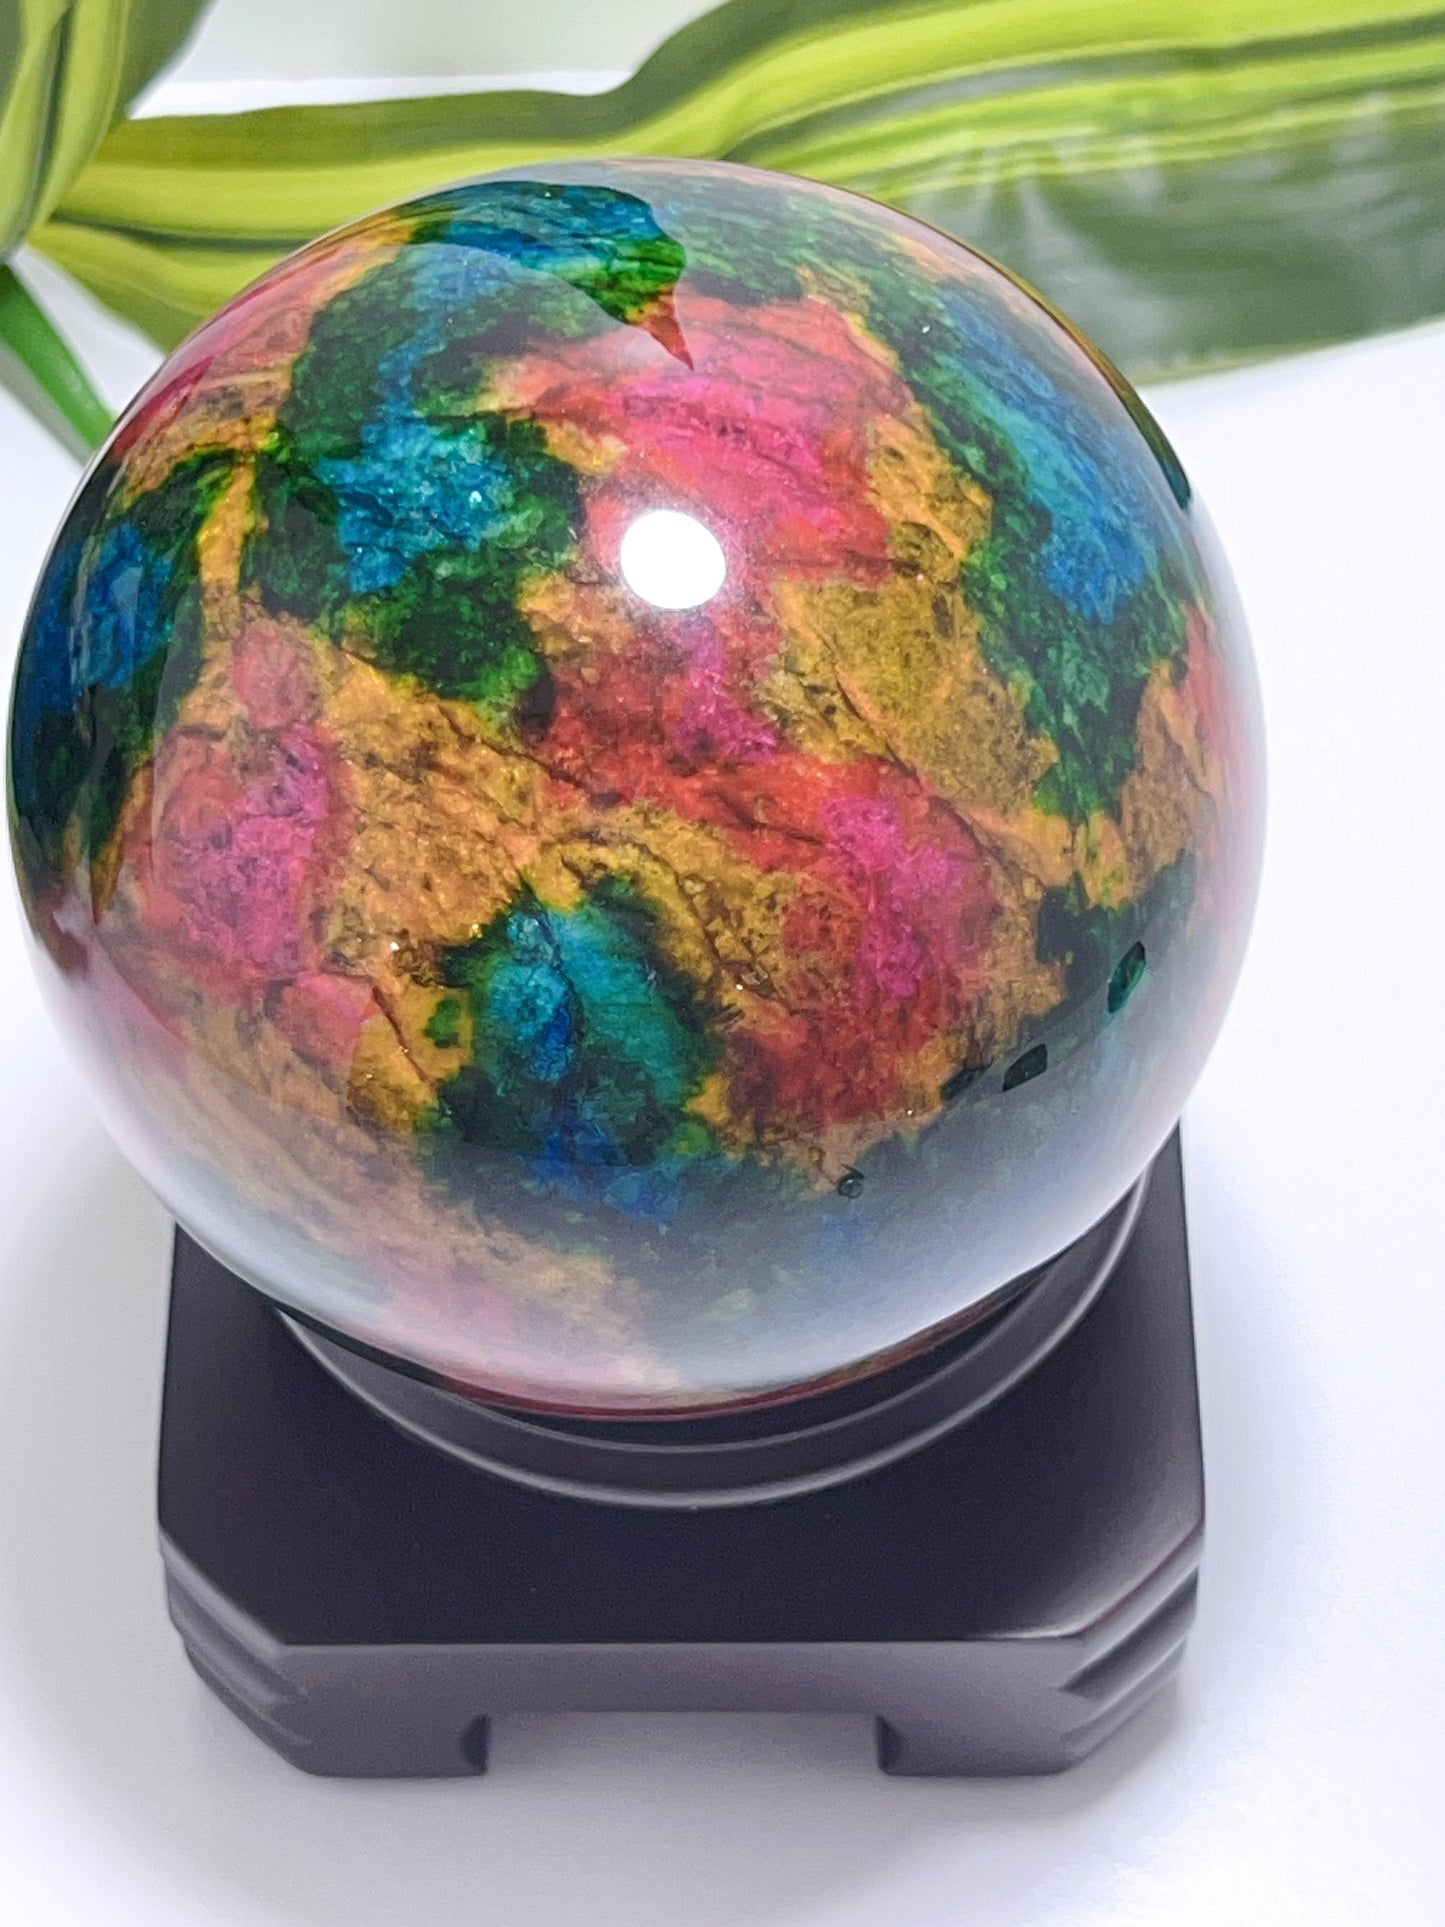 Seven Color Serpentine Jade Sphere with Stand 1766g